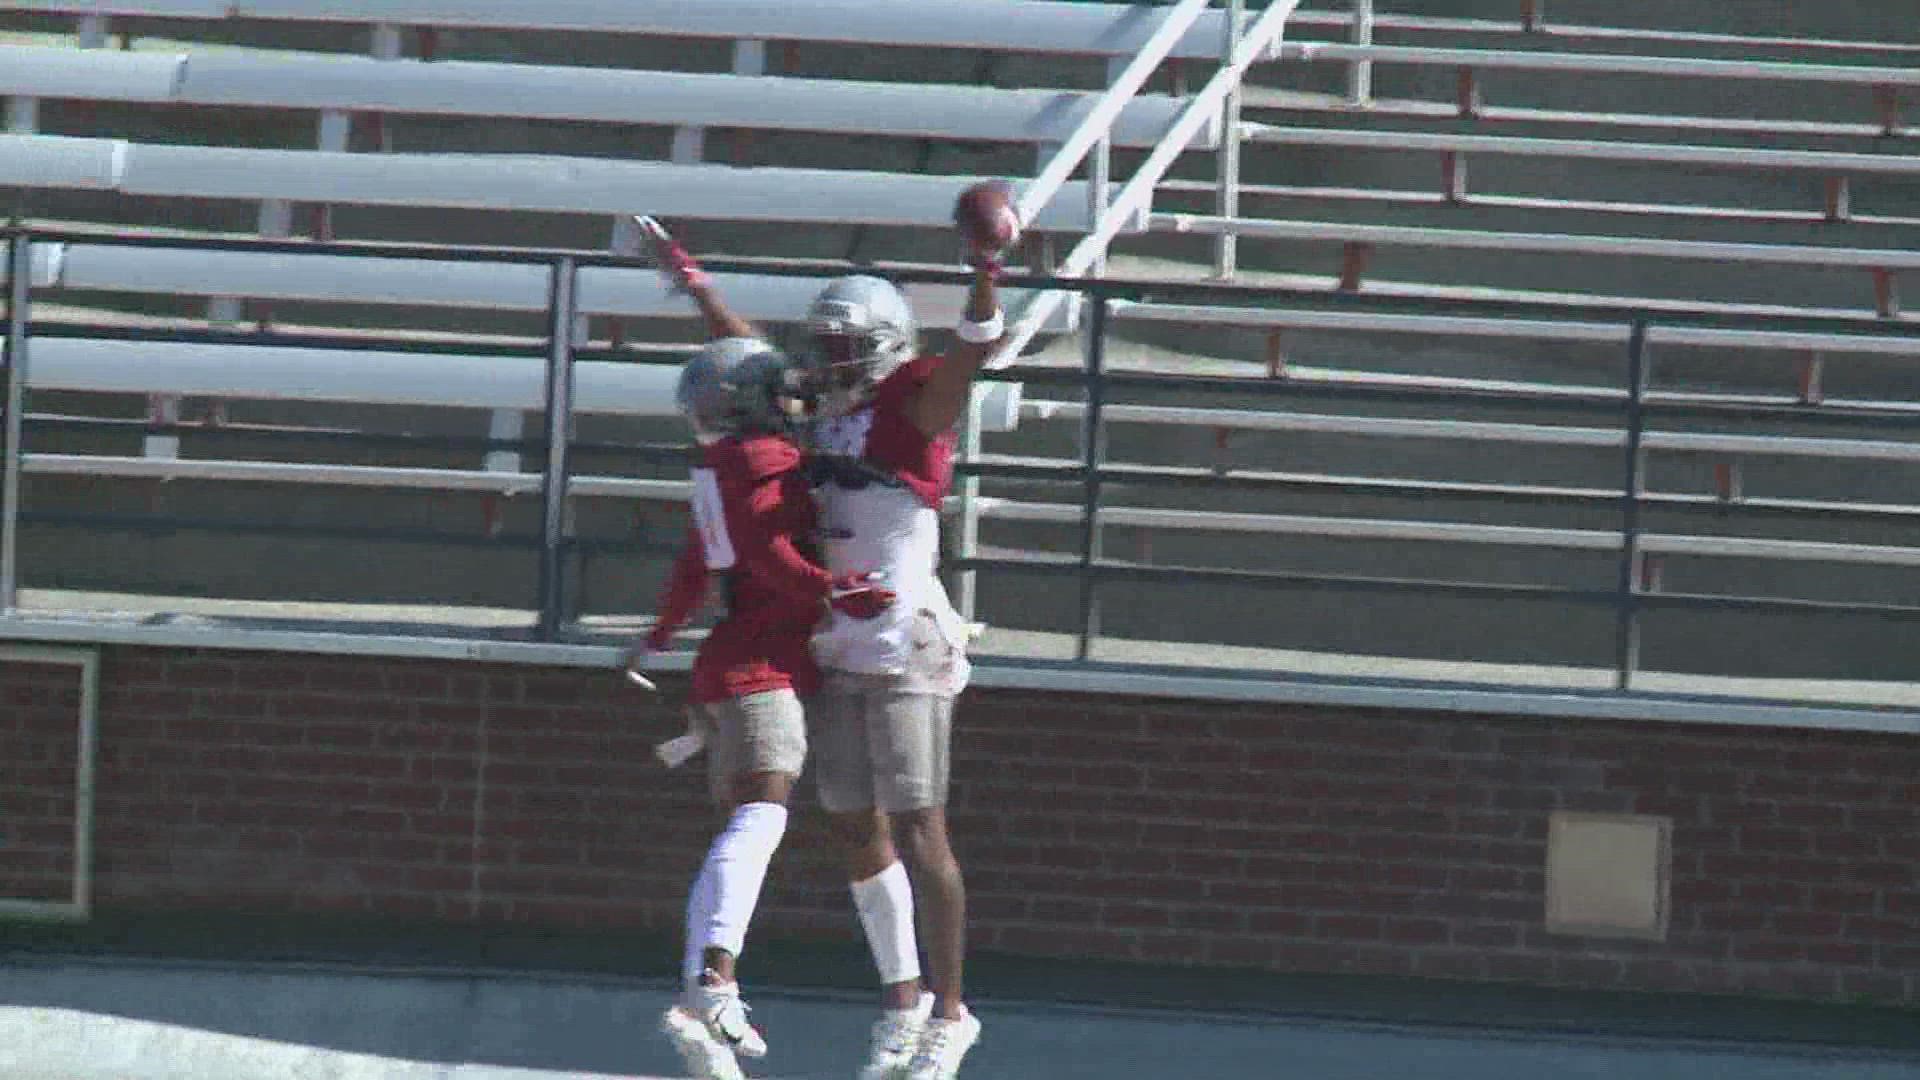 The Cougs scrimmaged for the first time as they sit three Saturdays away from their regular season opener